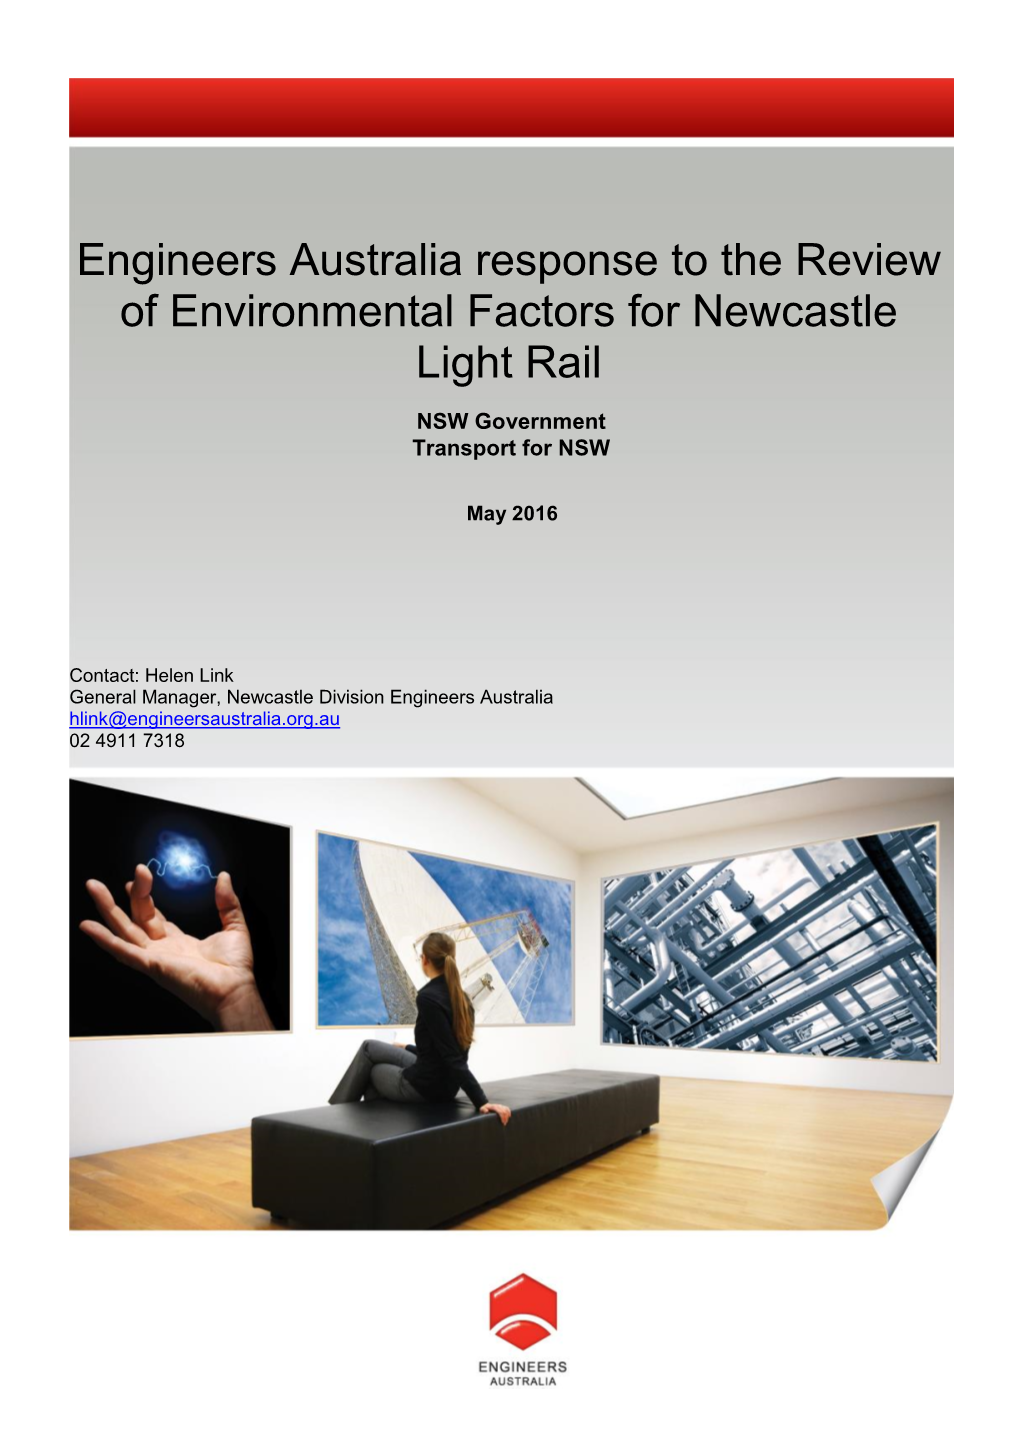 Engineers Australia Response to the Review of Environmental Factors for Newcastle Light Rail